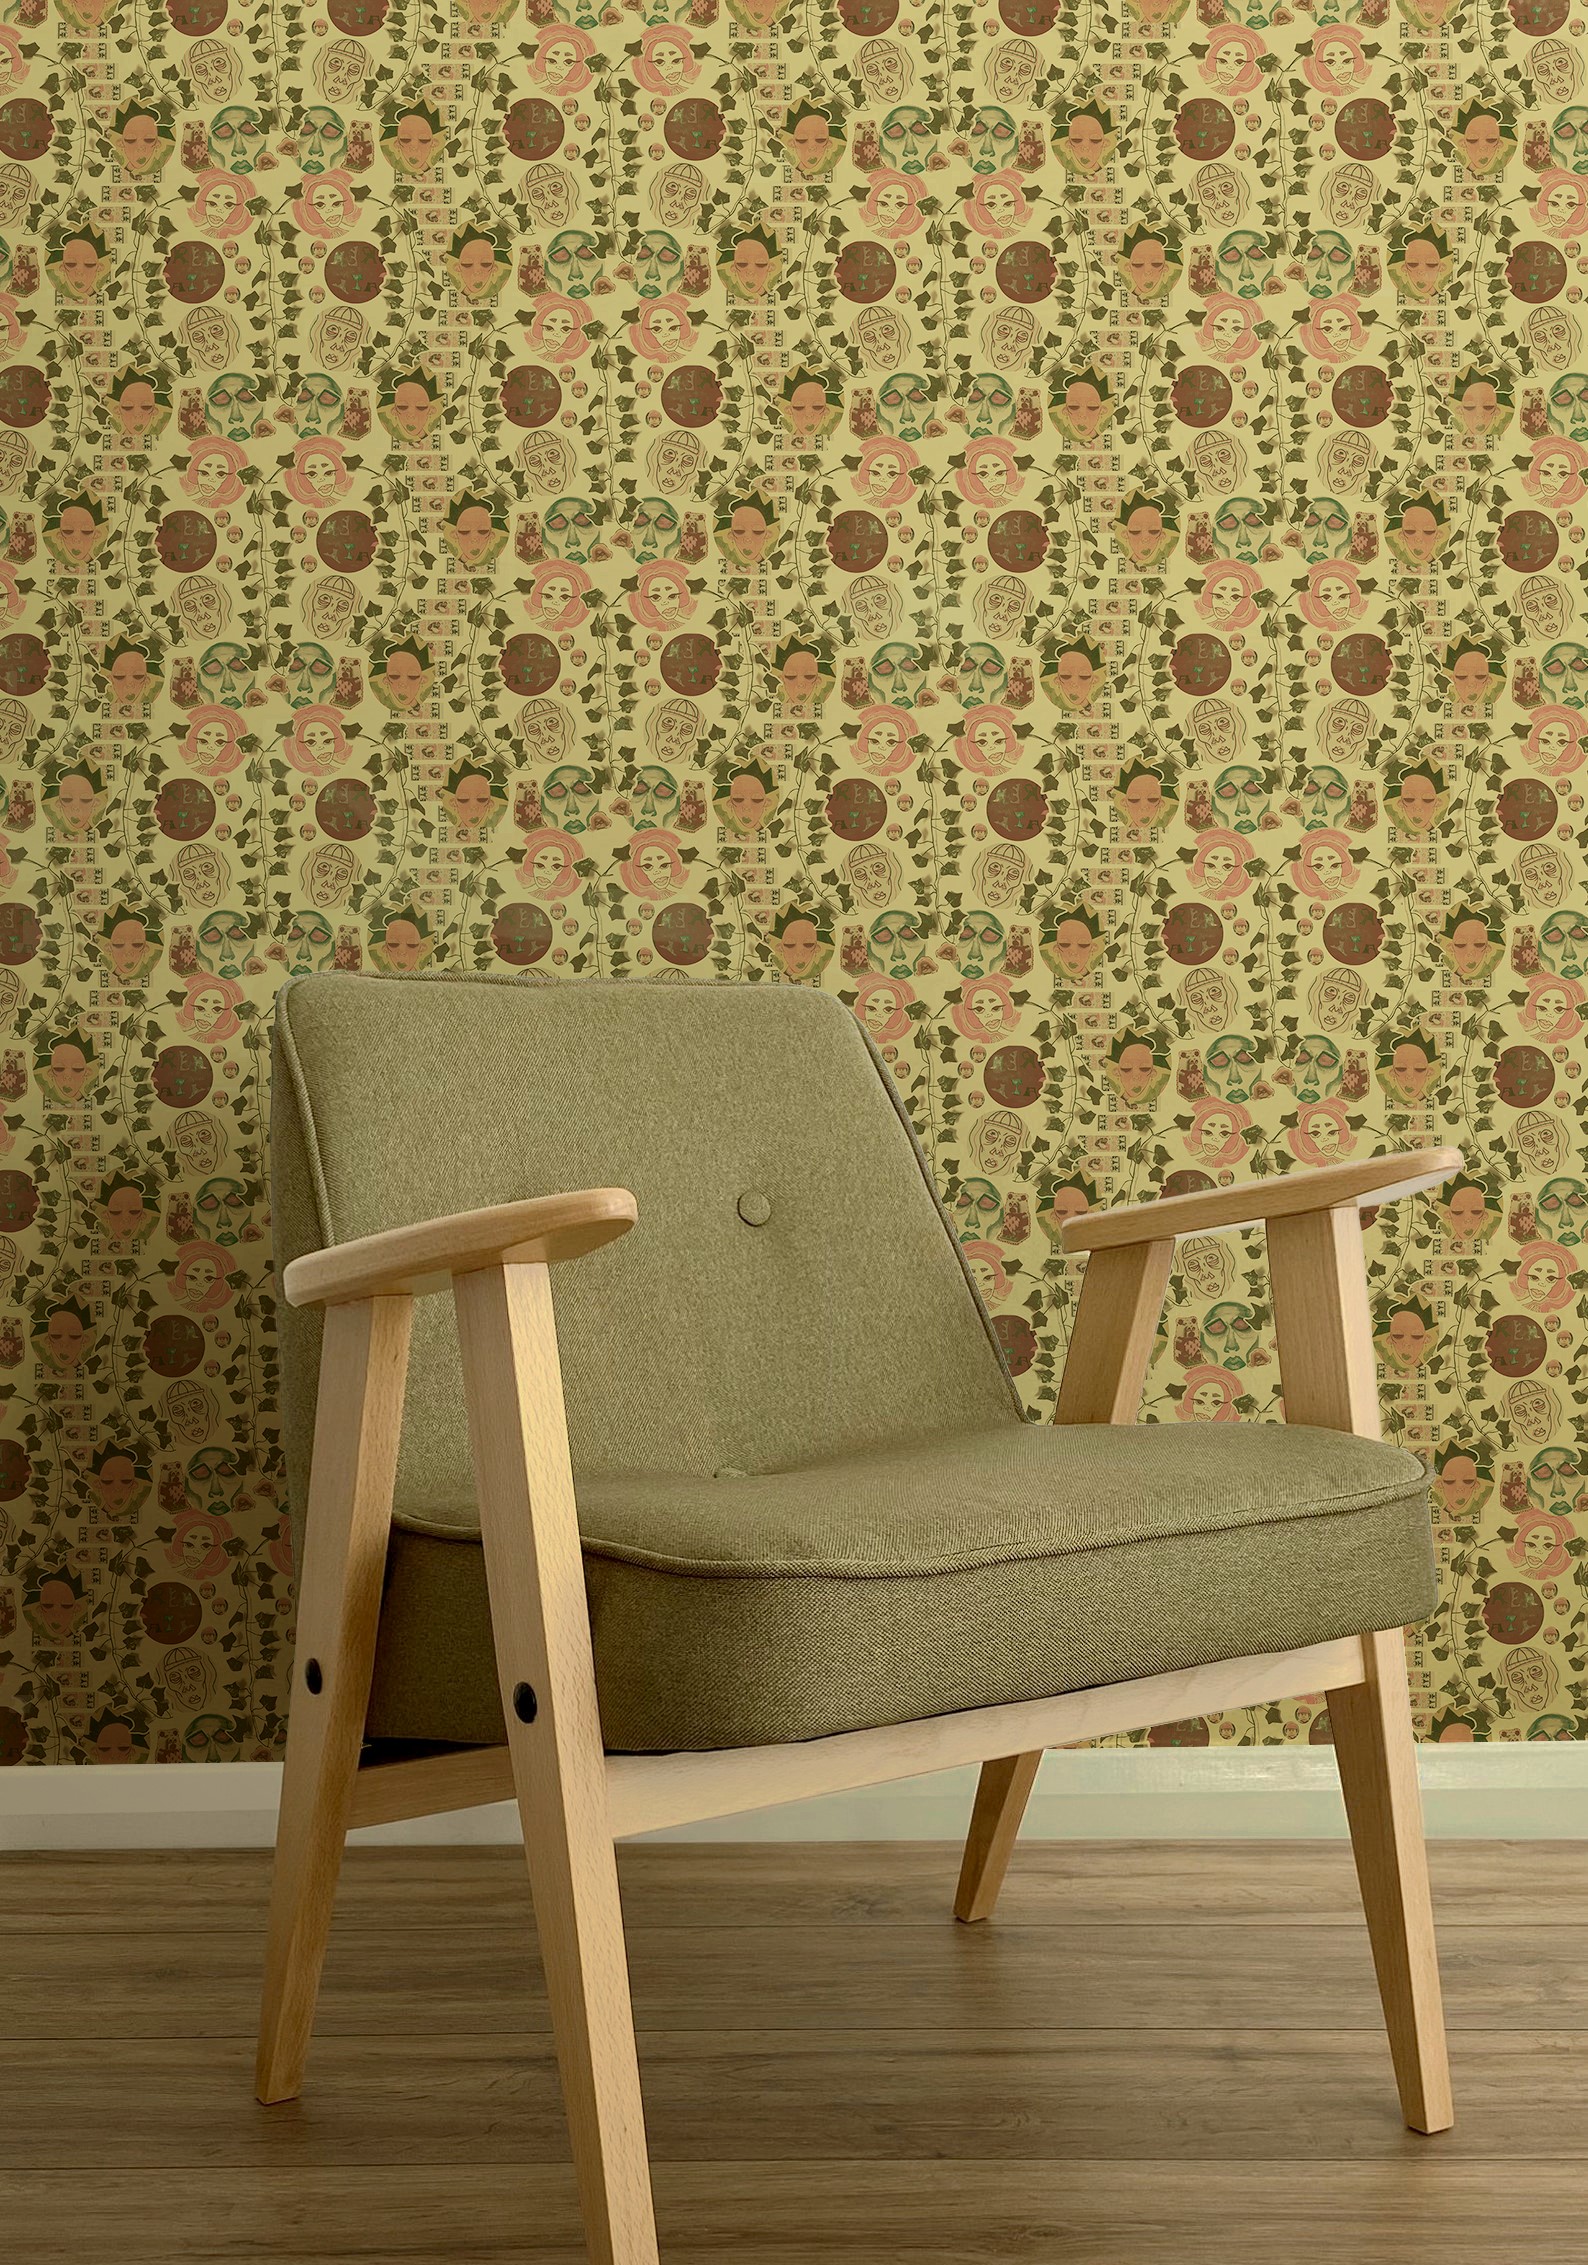 A chair sitting against a wallpapered wall.